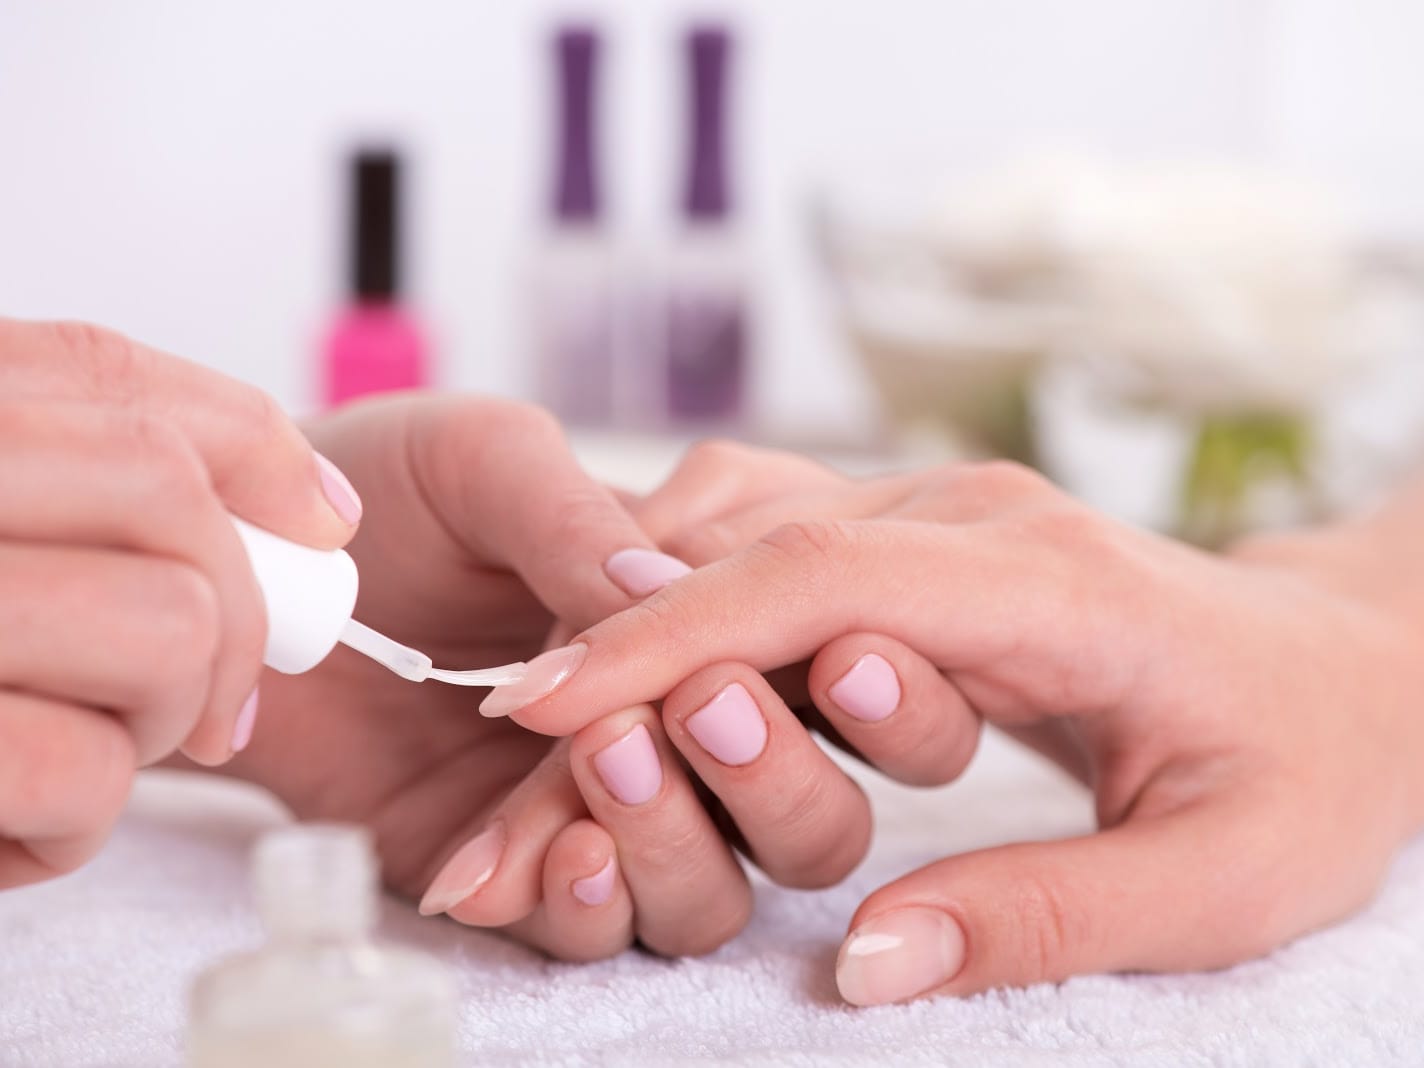 Gel Manicure and Classic Pedicure + Nail Art + Return Soak off (2 Sessions) at Specialist Nail & Beauty Spa - Get Deals, Cashback and Rewards with ShopBack GO